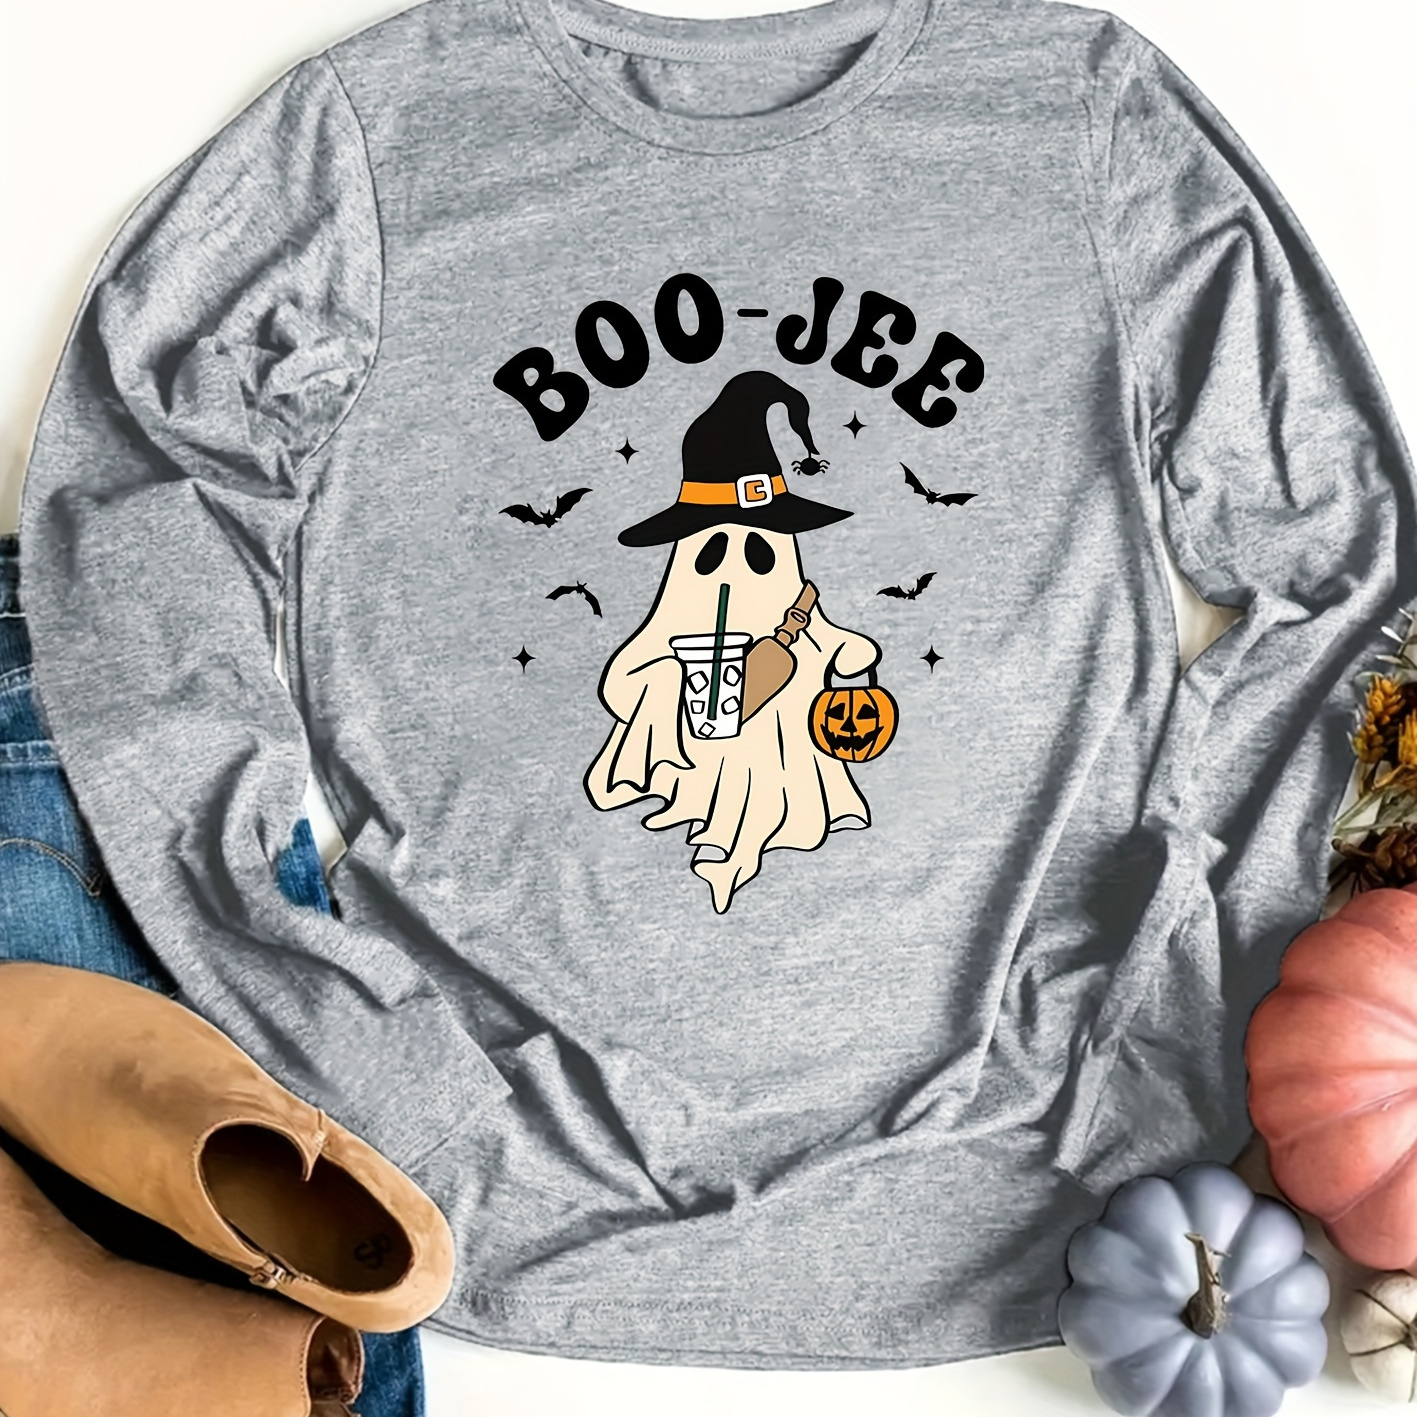 

Women's Long Sleeve Halloween T-shirt, "boo-jee" Ghost With Boba Graphic, Casual Round Neck, Retro Style, Fashion Autumn Winter Top